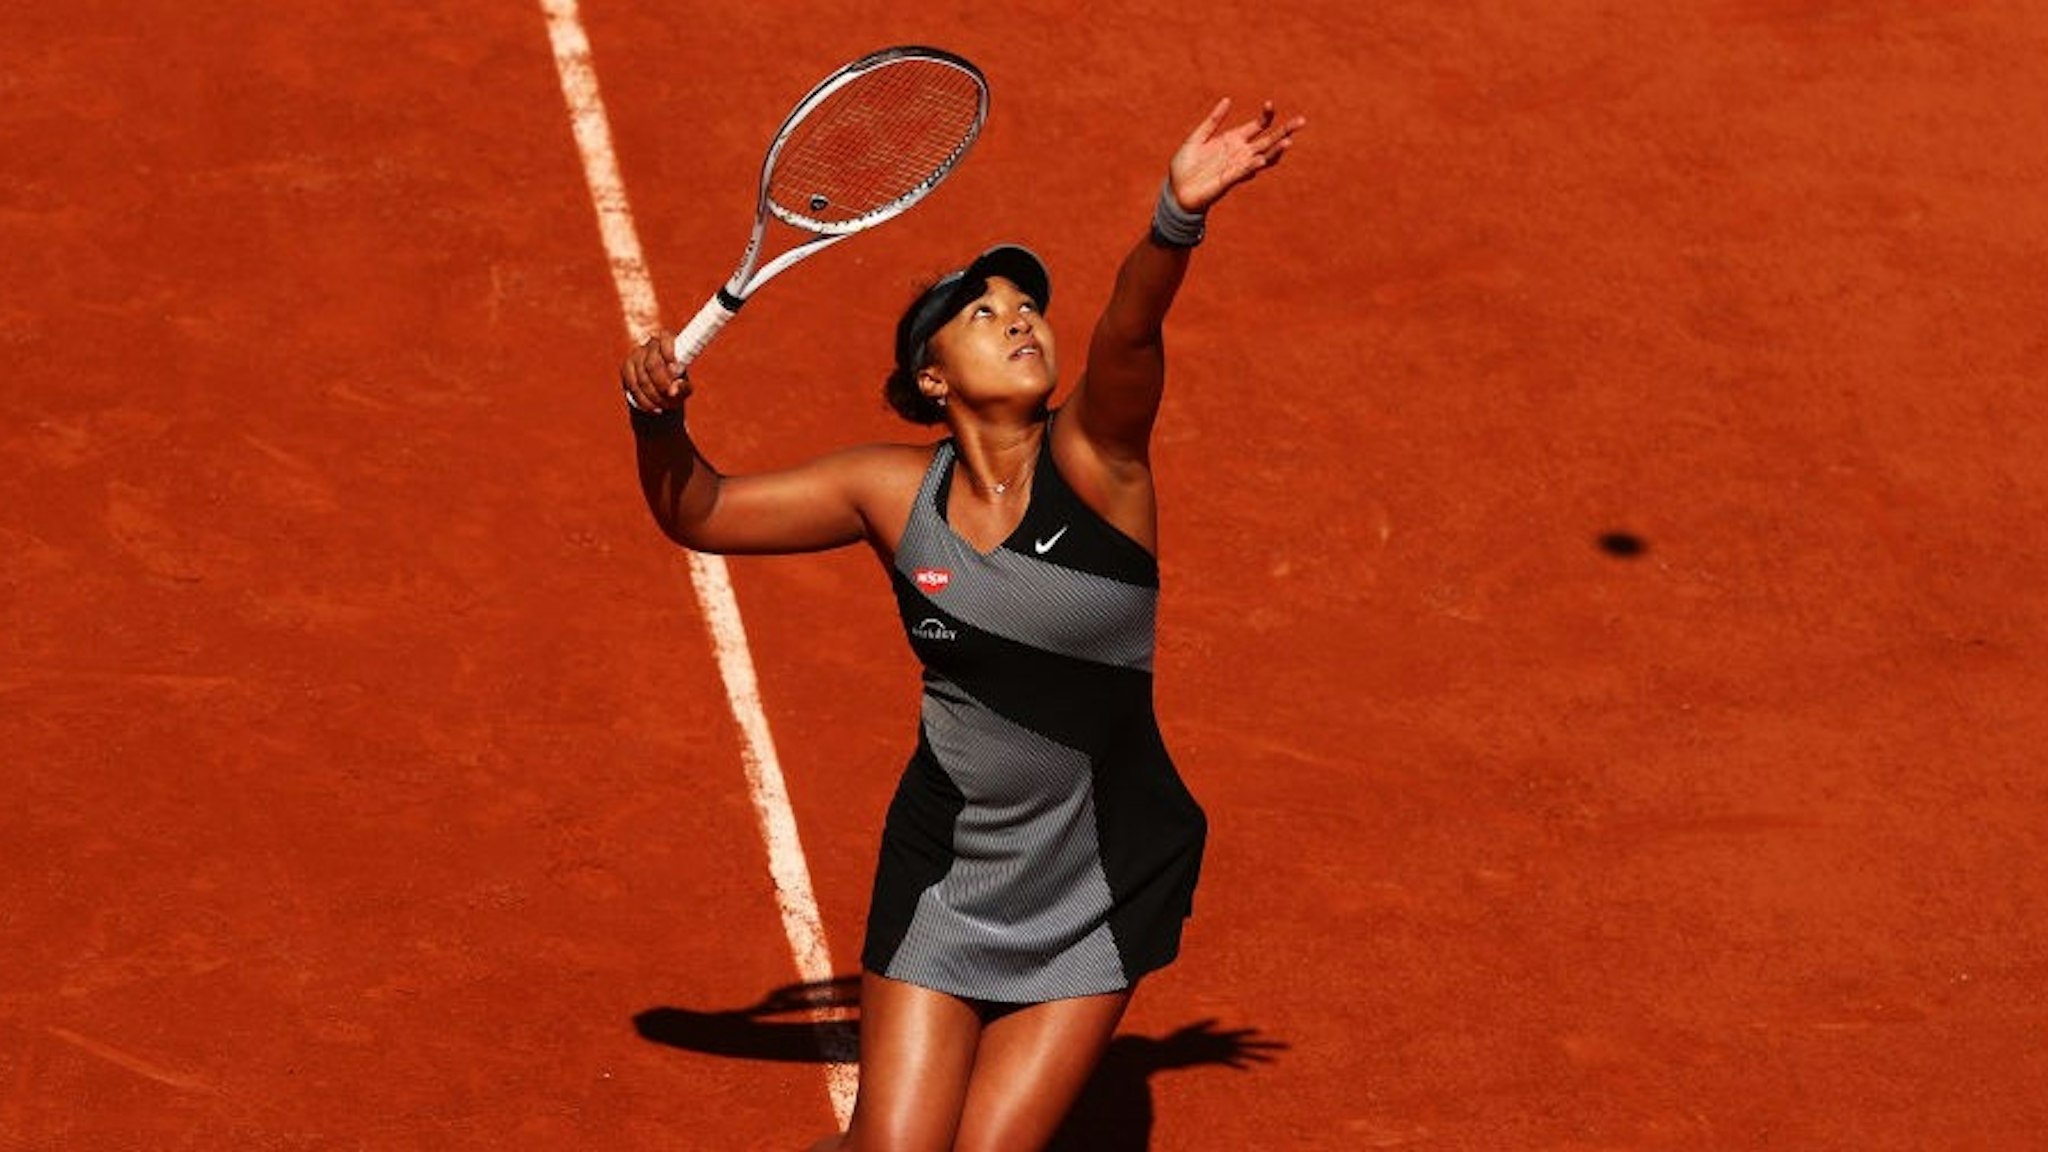 PARIS, FRANCE - MAY 30: Naomi Osaka of Japan serves in her First Round match against Patricia Maria Tig of Romania during Day One of the 2021 French Open at Roland Garros on May 30, 2021 in Paris, France. (Photo by